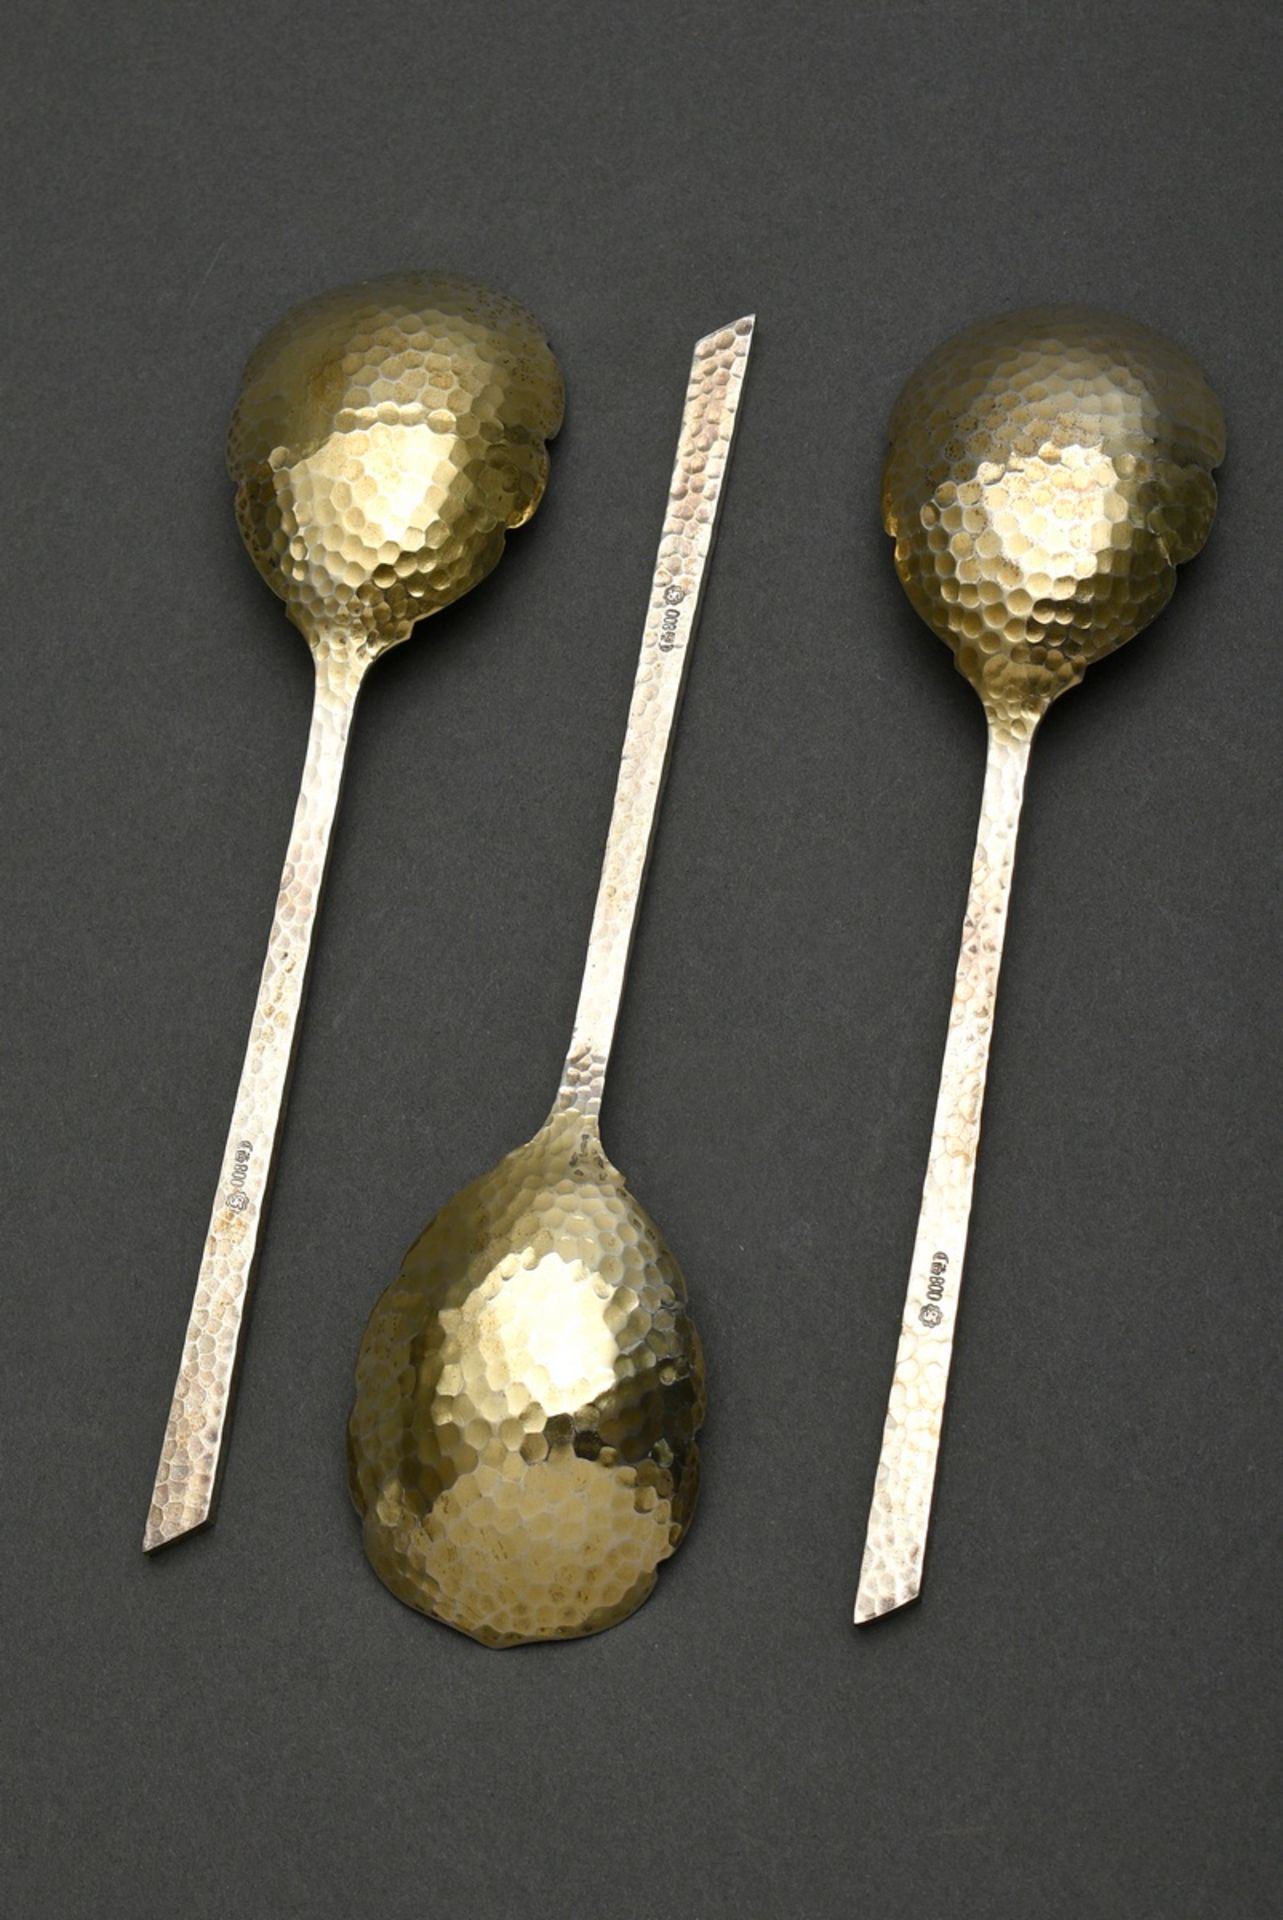 3 Martellated serving spoons with gilded floral lobe and angular handle, MM: Otto Schneider/Berlin, - Image 2 of 2